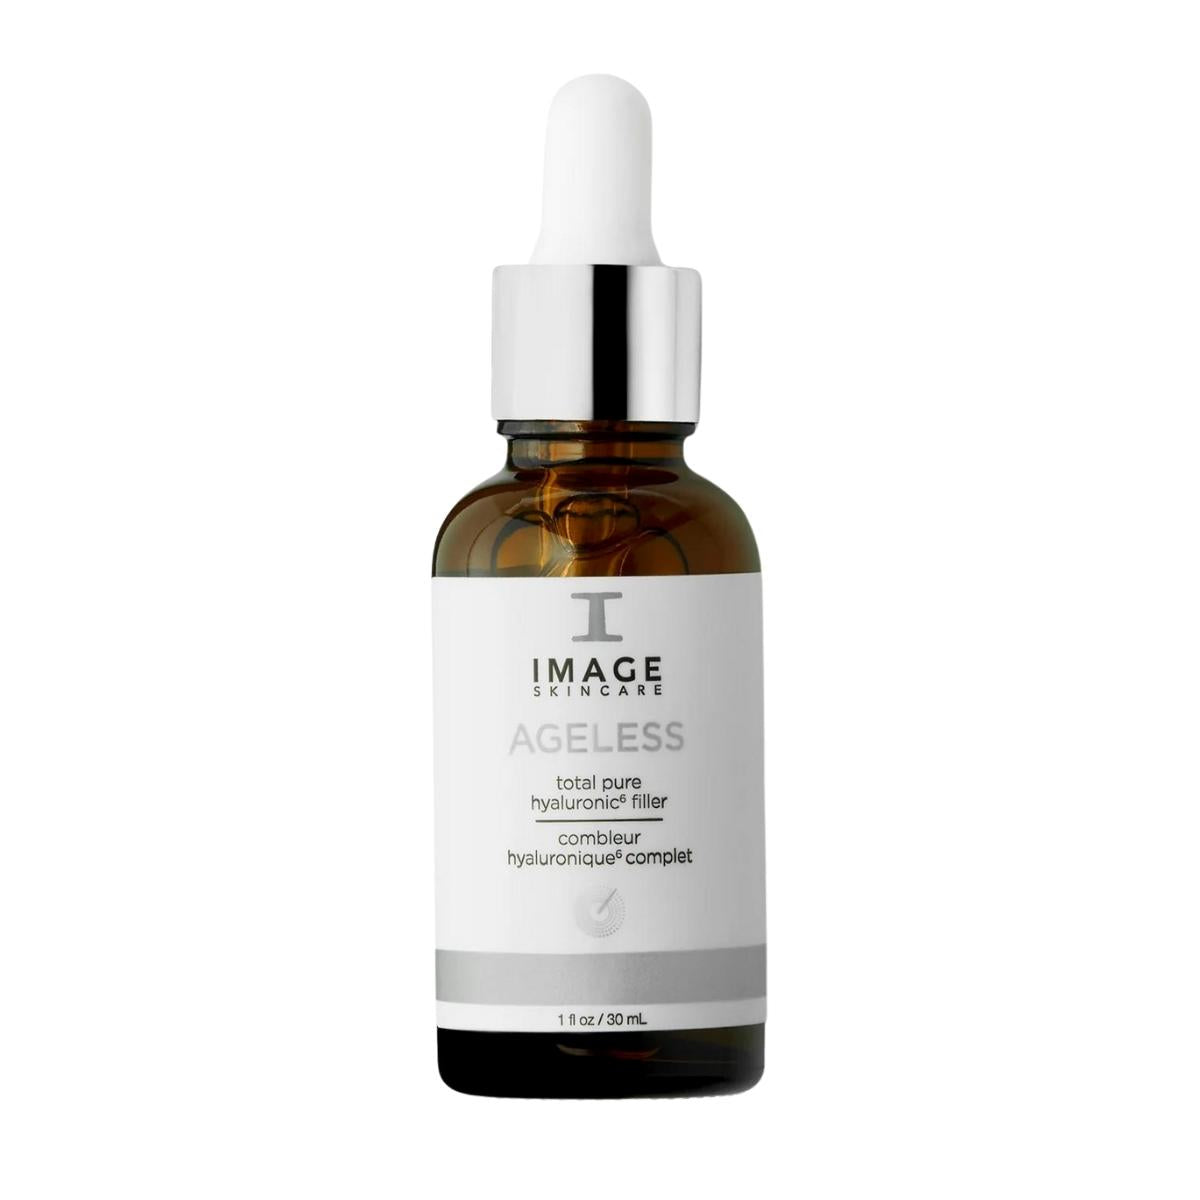 IMAGE Skincare Ageless Total Pure Hyaluronic Filler